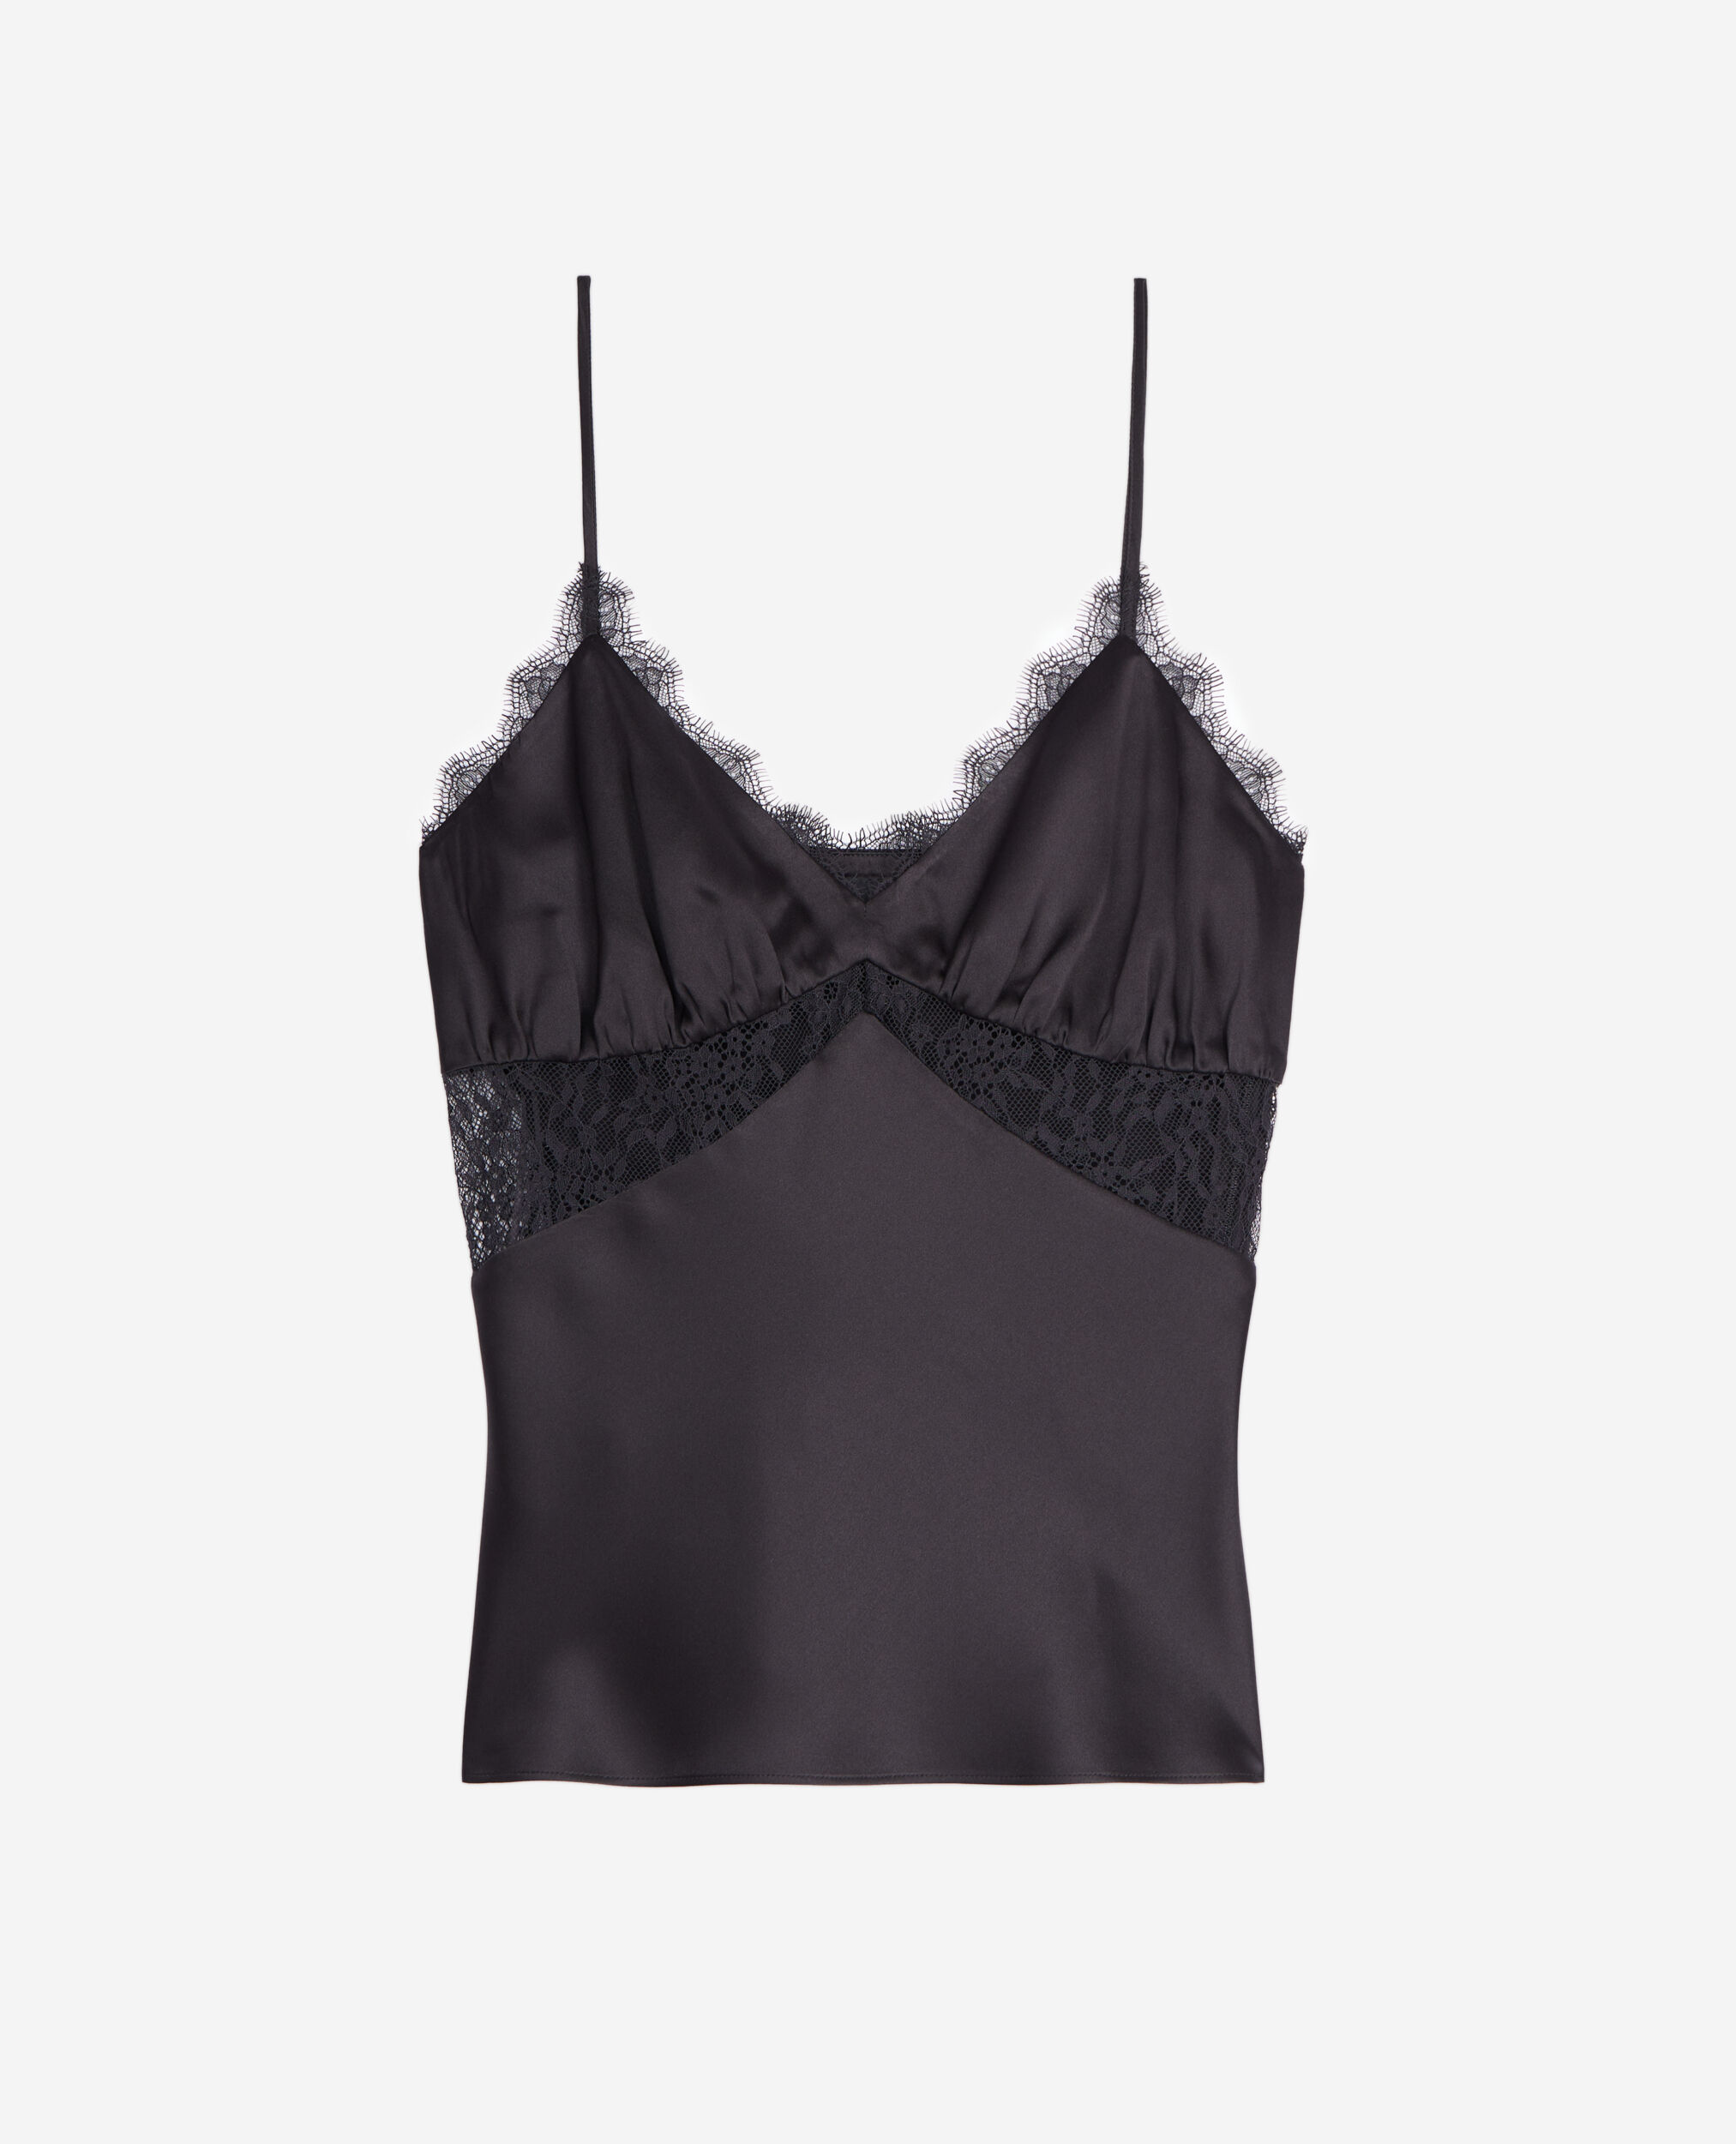 BL.Tops - A chic, luxurious black silk cami with built-in bra for any  occasion. Now if there were only a black silk dress with the same built-in  support 😉⁠⠀ .⁠⠀ .⁠⠀ .⁠⠀ .⁠